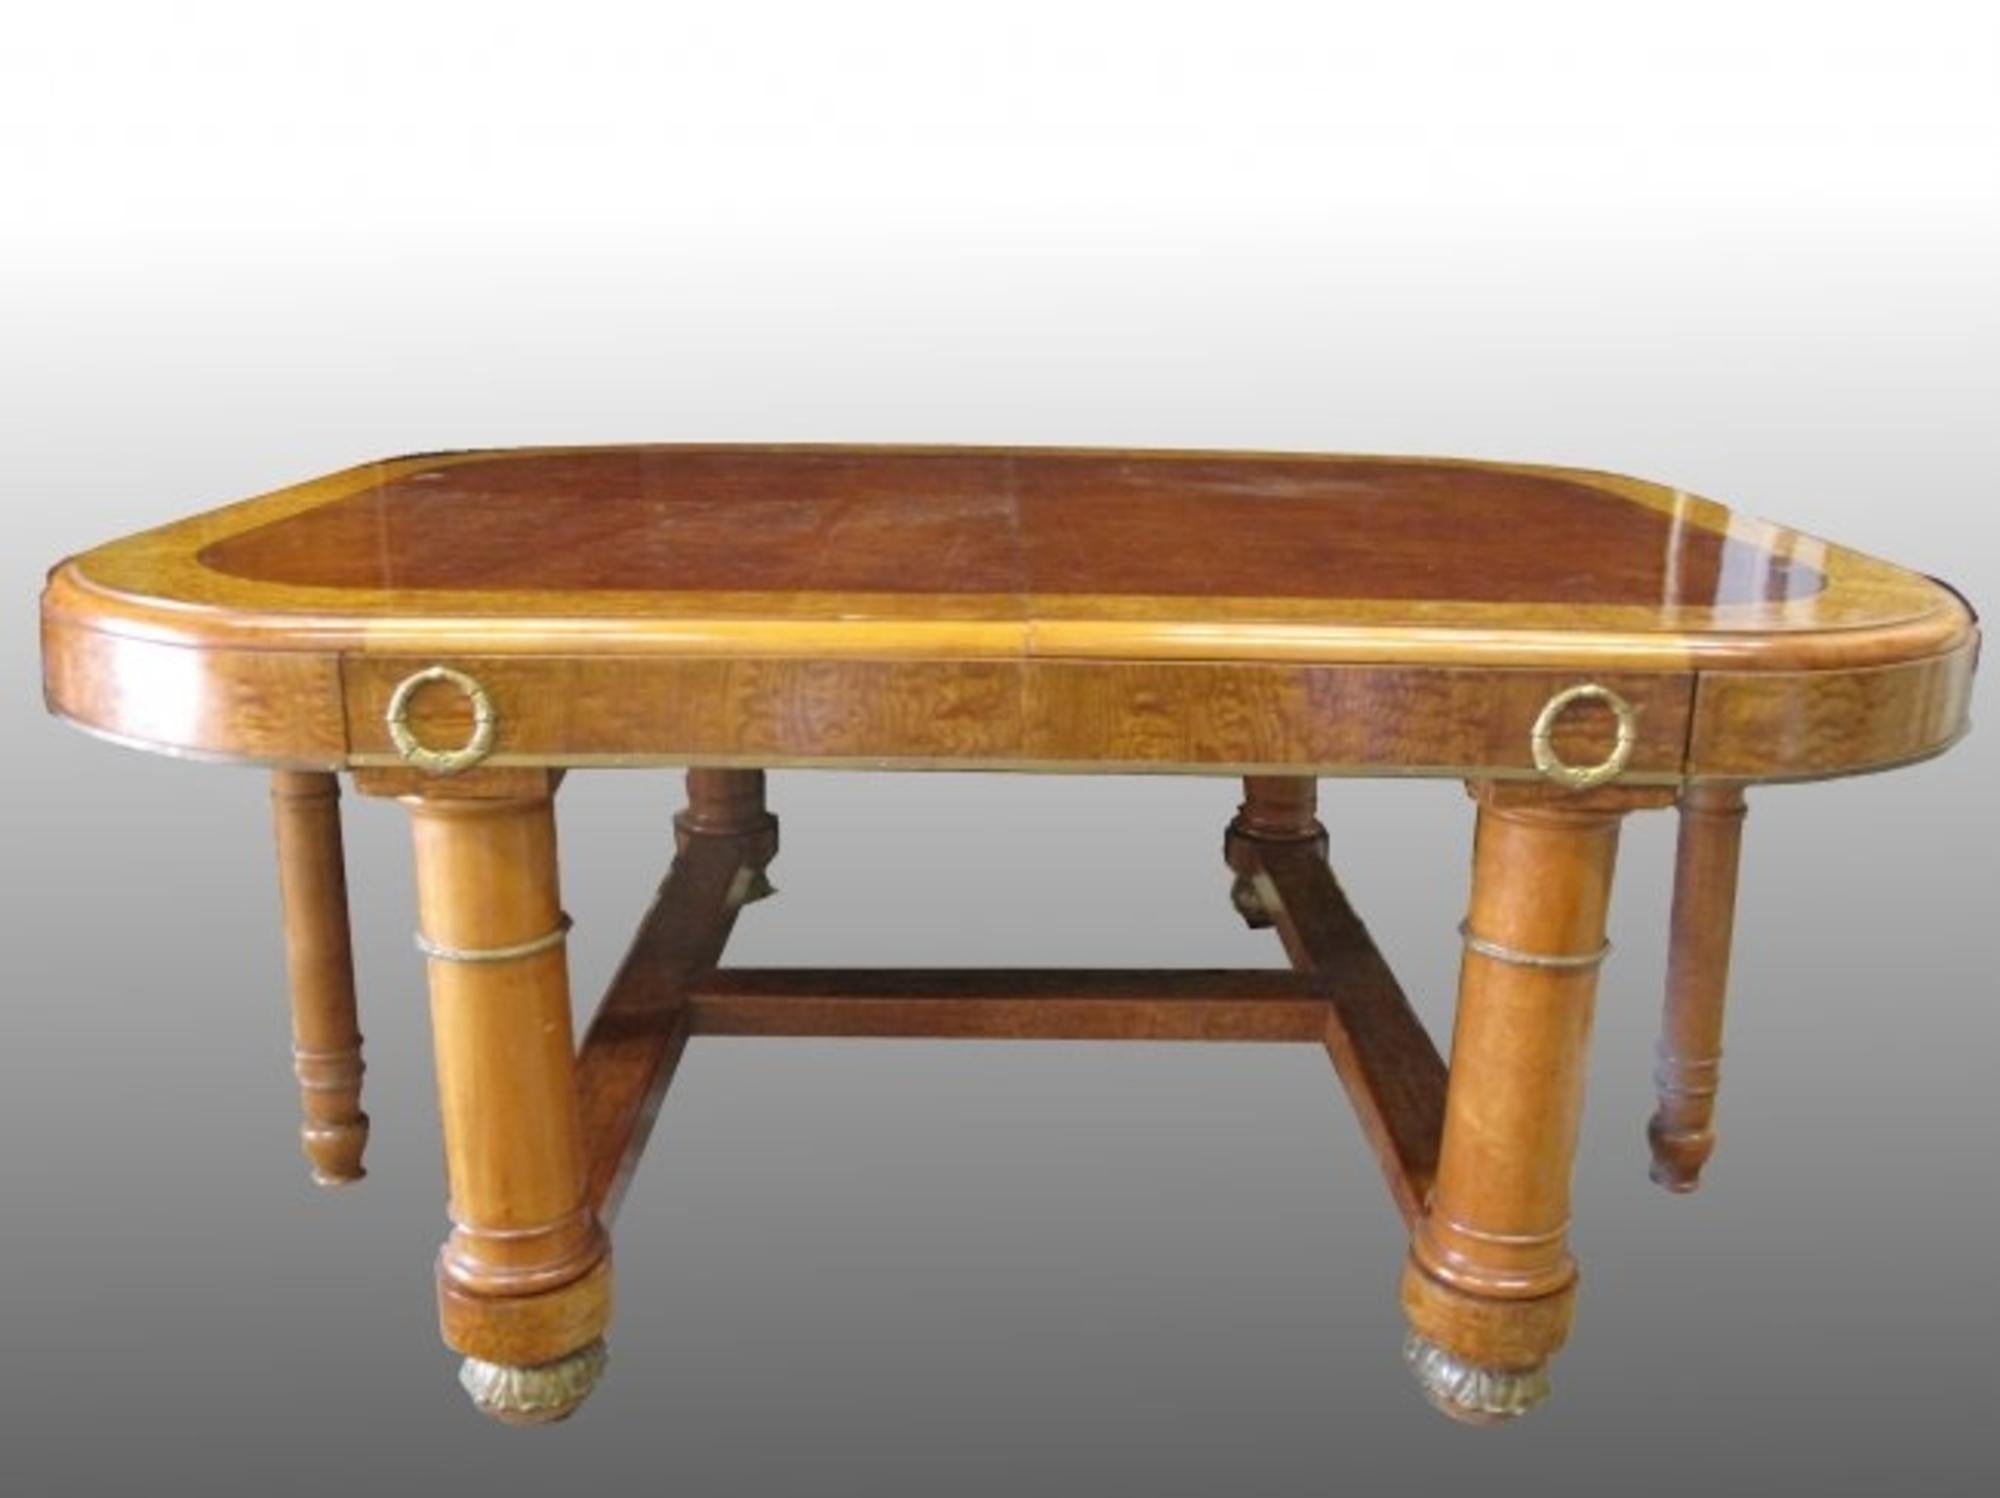 A French ormolu-mounted lacewood and burr maple extending 
Dining table, first quarter of the 20th century.
The rectangular top with rounded corners, the frieze applied with laurel garlands, on heavy cylindrical legs joined by an 'H'-shaped